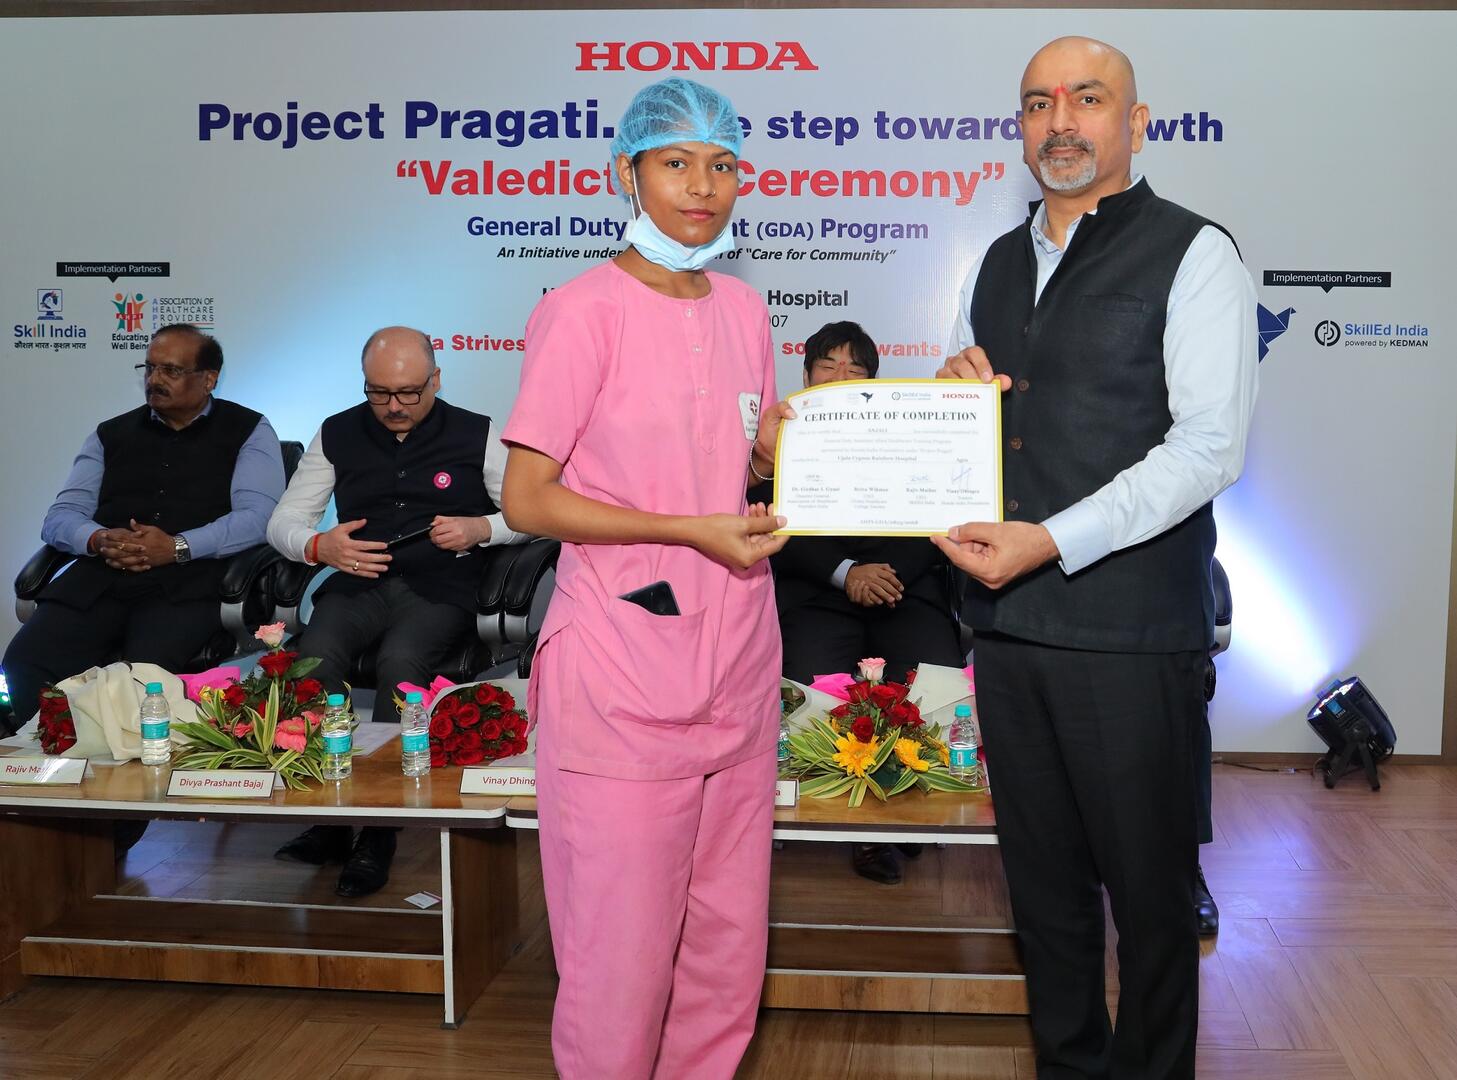 Project Pragati was launched under its ‘Care for Community Mission’